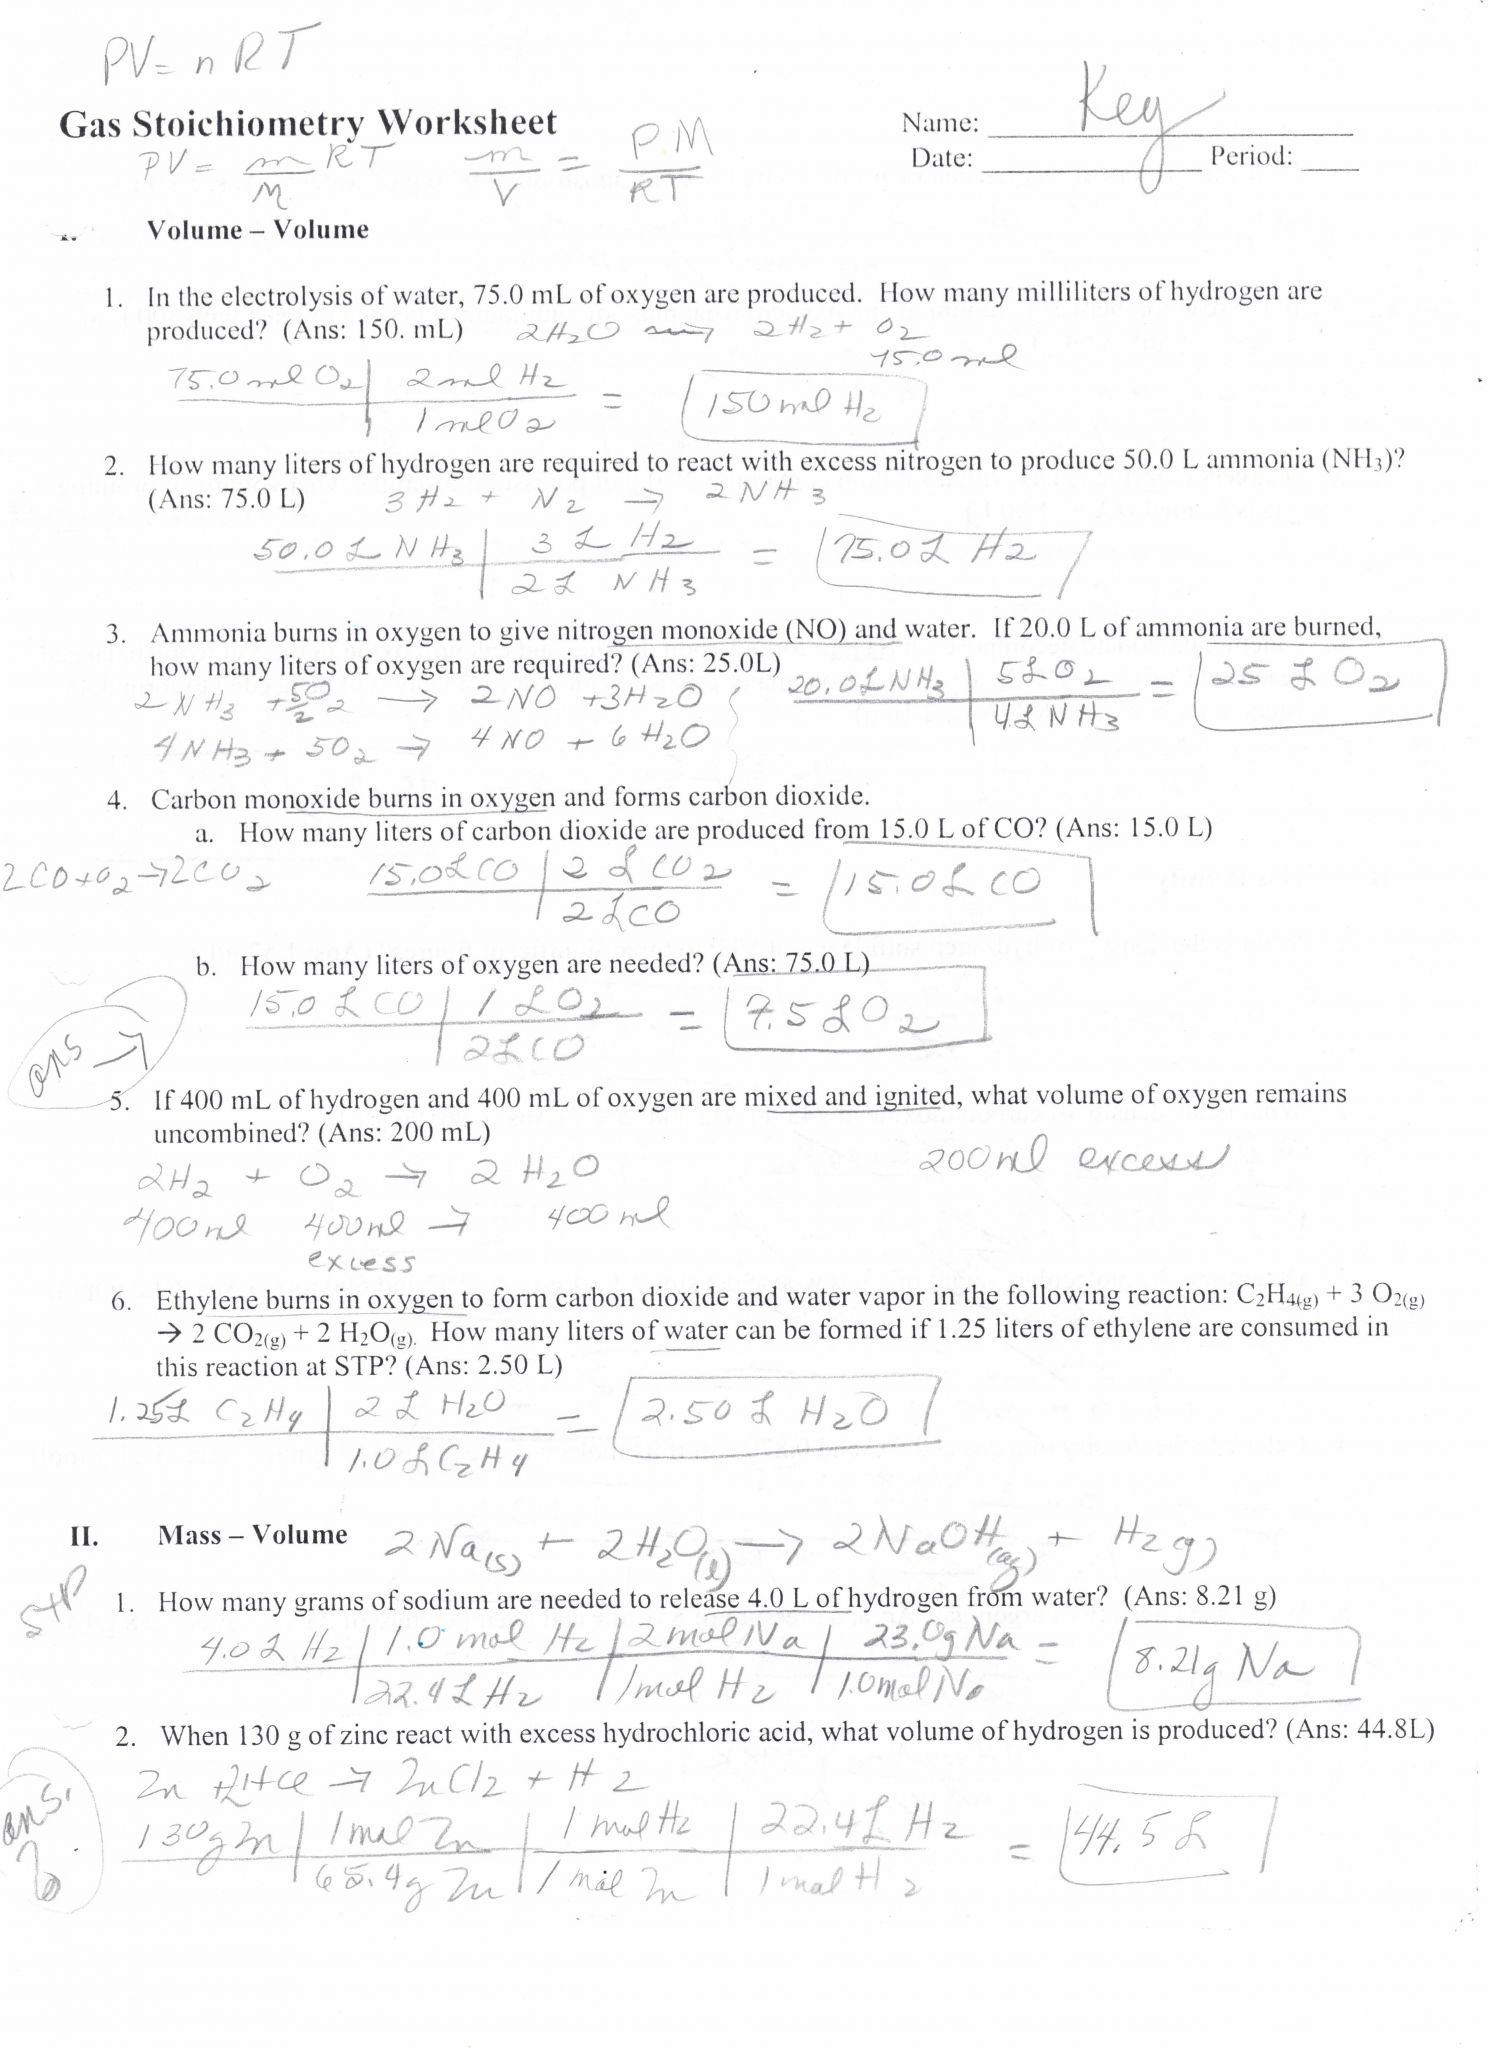 Momentum Problems Worksheet Answers and theoretical and Percent Yield Worksheet Answers & ""sc" 1"st" "